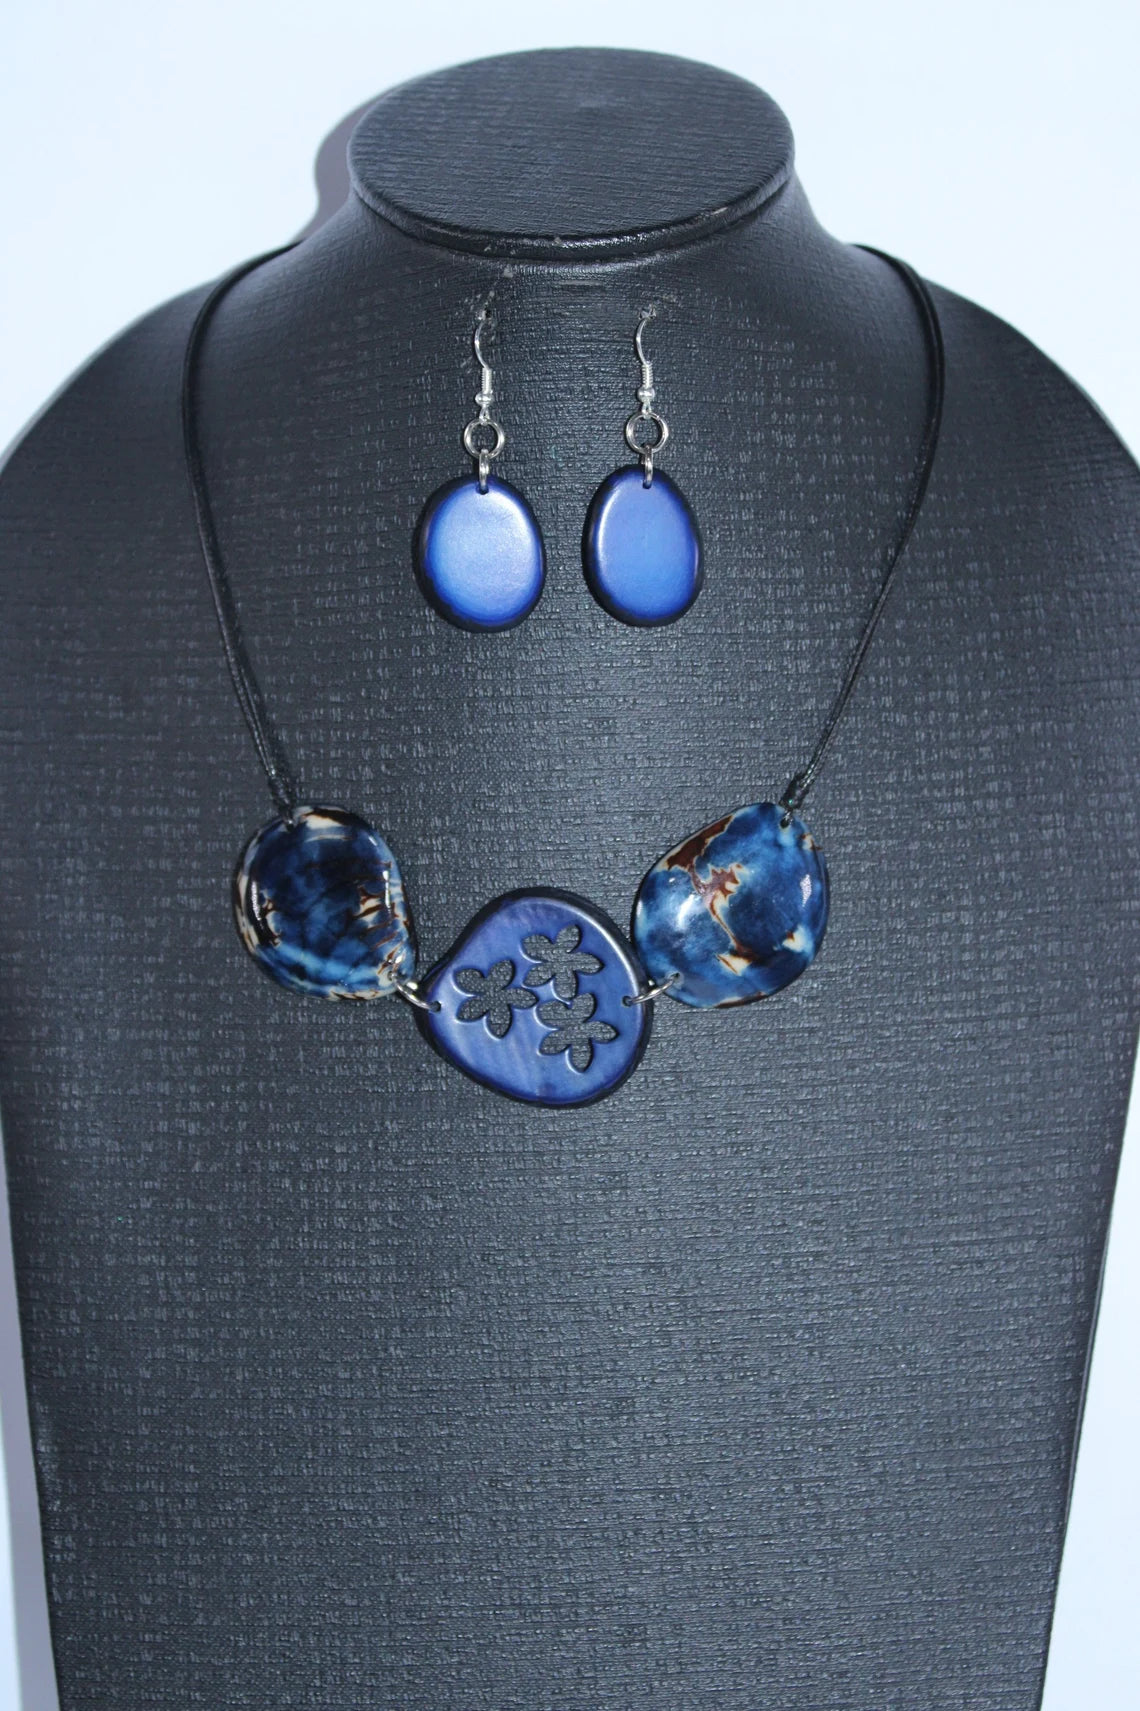 Tagua Pendant Necklace and Earrings Set in Blue Color